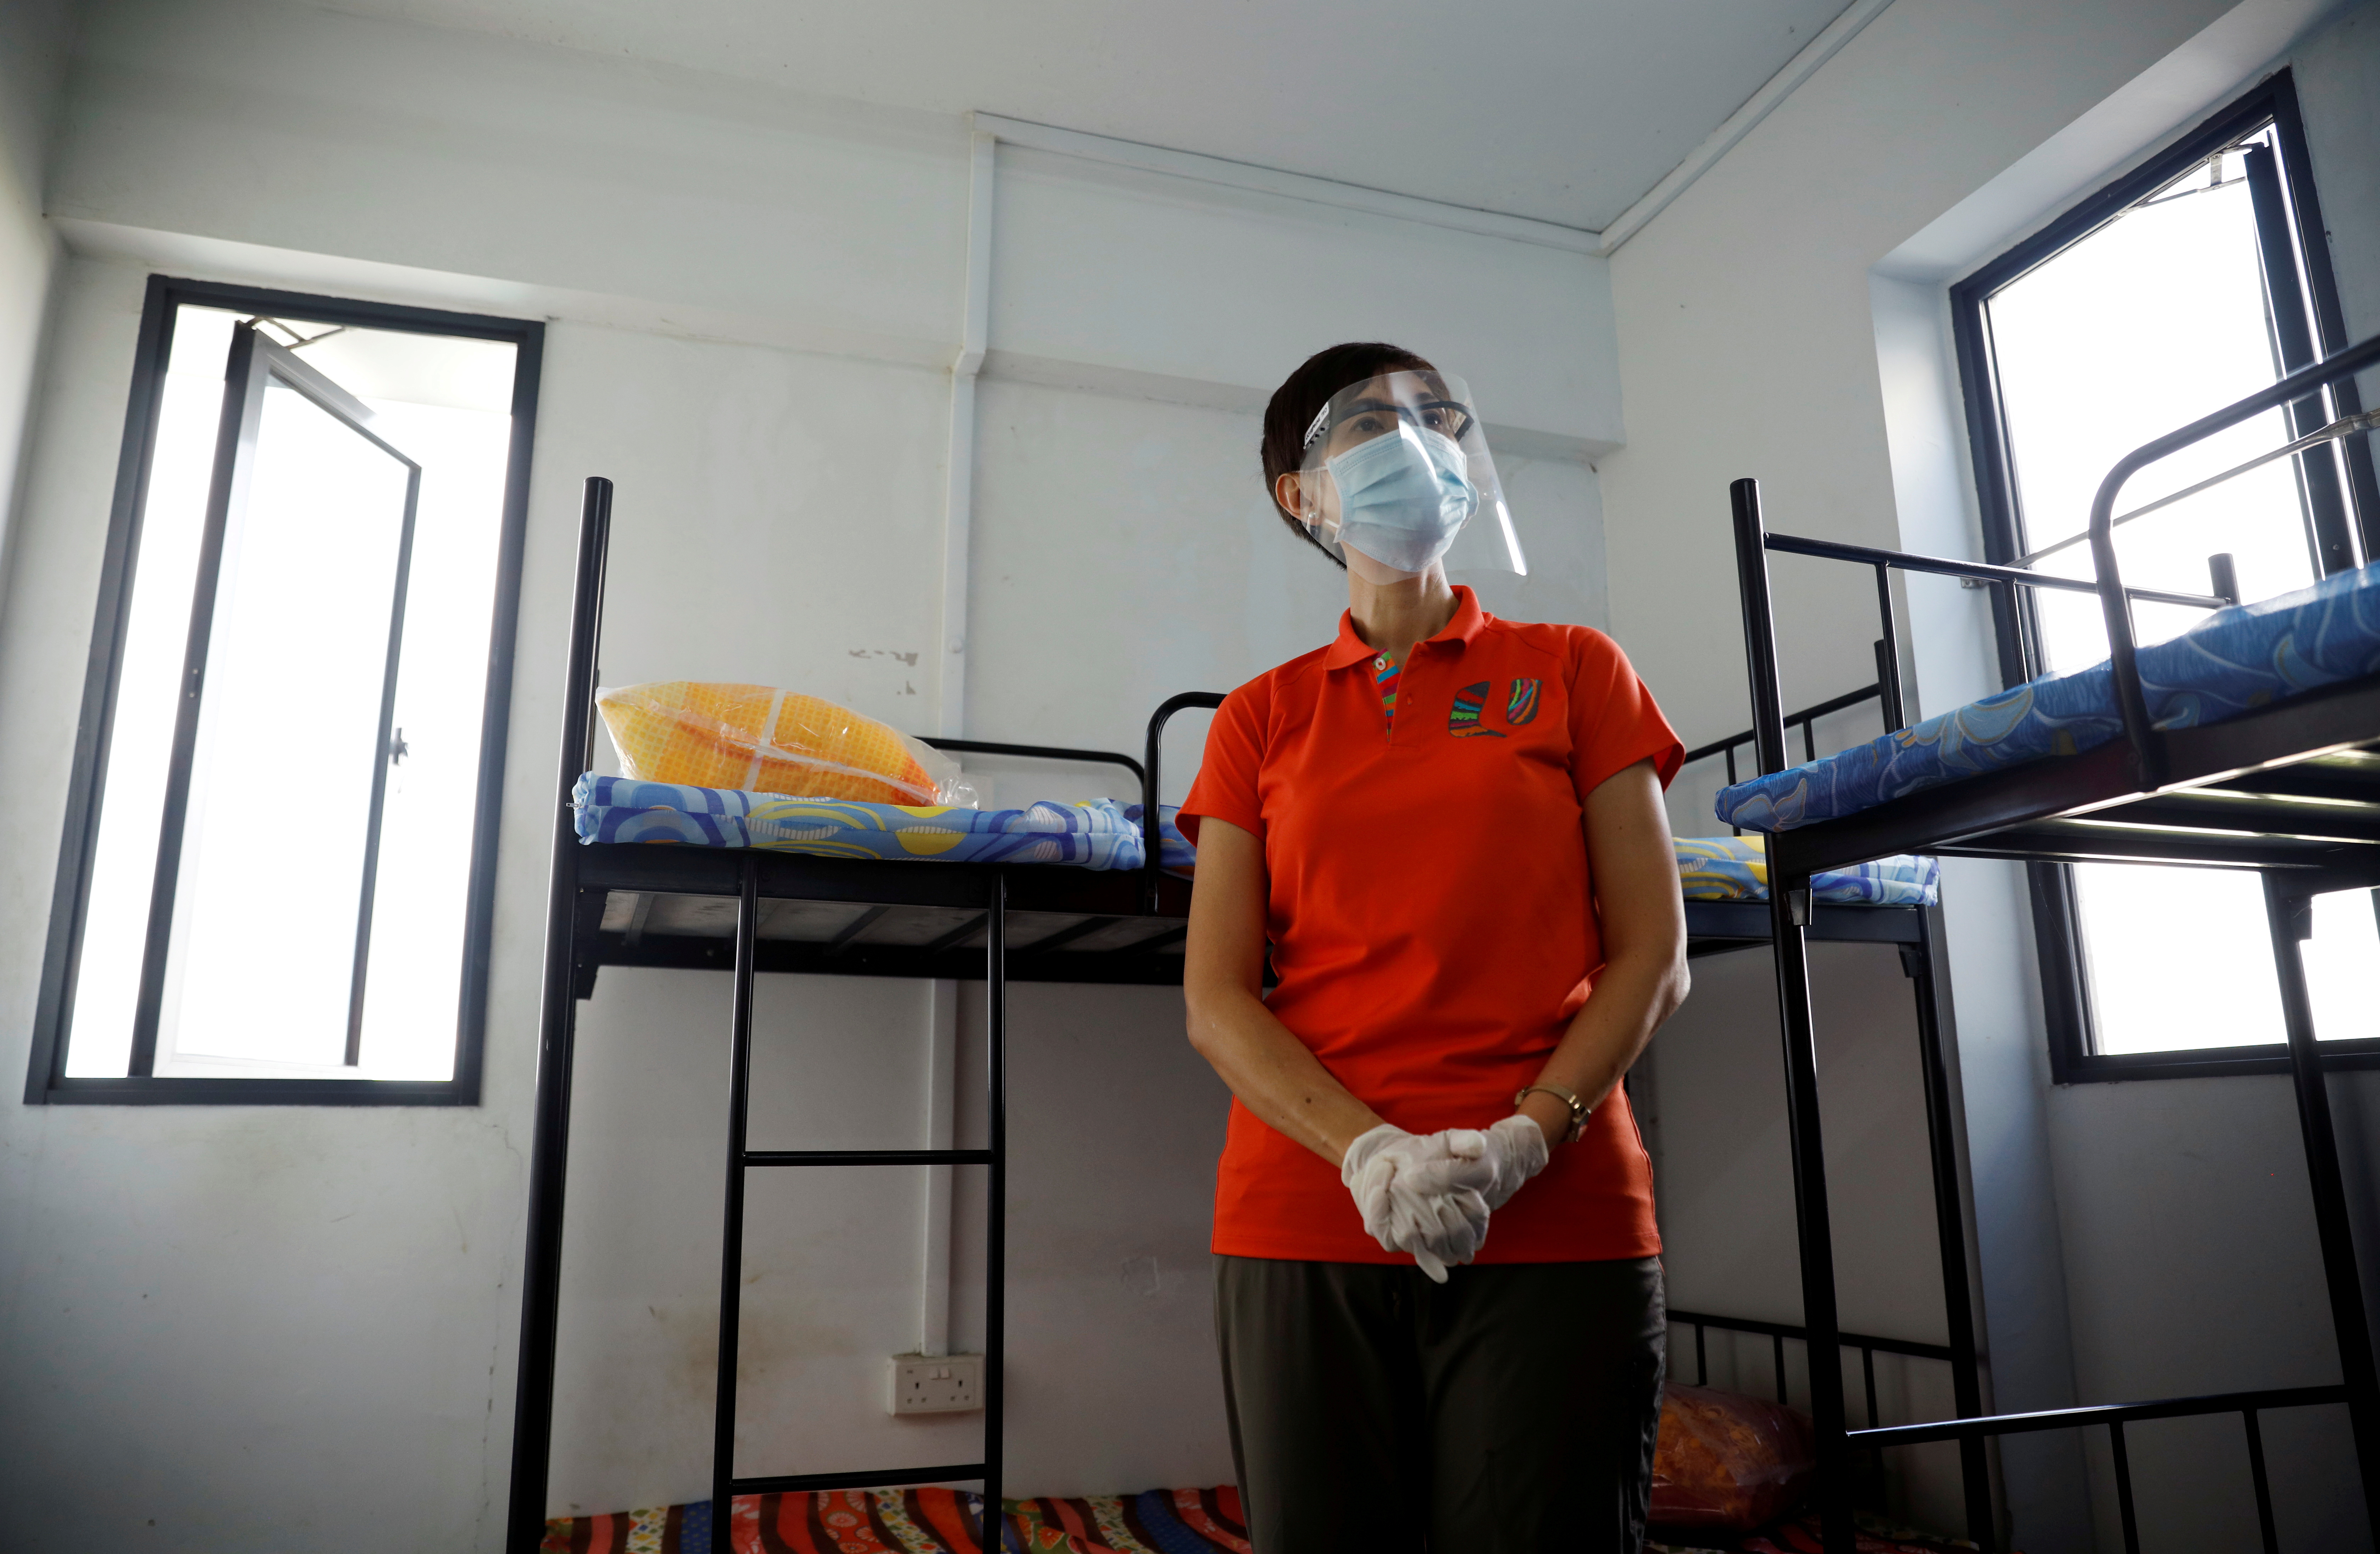 Singapore's Minister of Manpower Josephine Teo tours a dormitory room for migrant workers who have recovered from the coronavirus disease (COVID-19), amid the outbreak in Singapore May 15, 2020.  REUTERS/Edgar Su